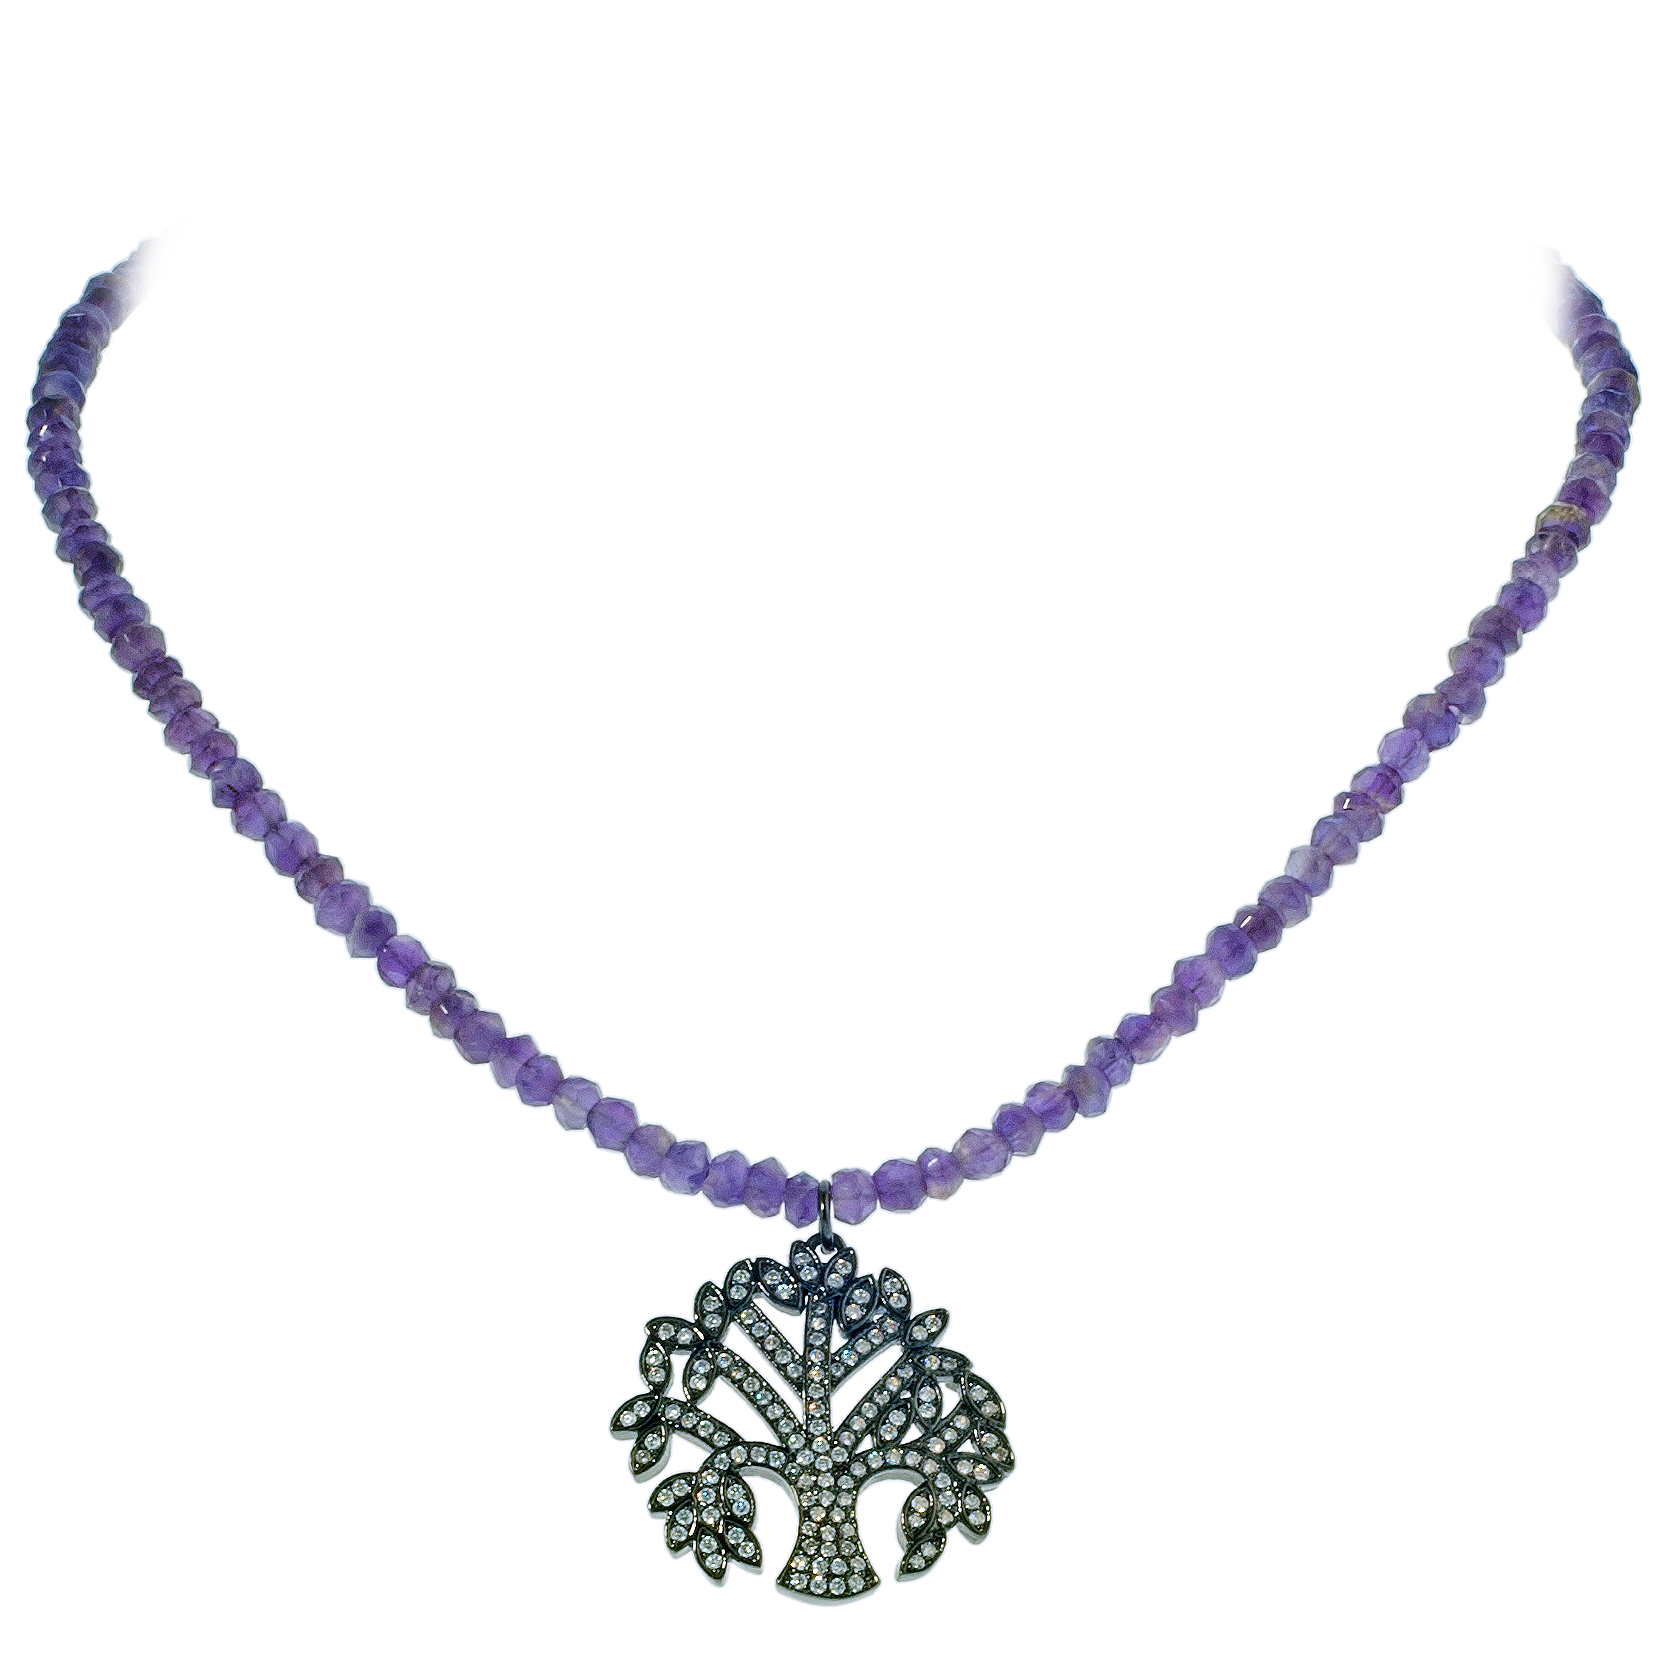 Pavé Crystal Tree of Life Pendant on Faceted Amethyst Necklace - KJKStyle